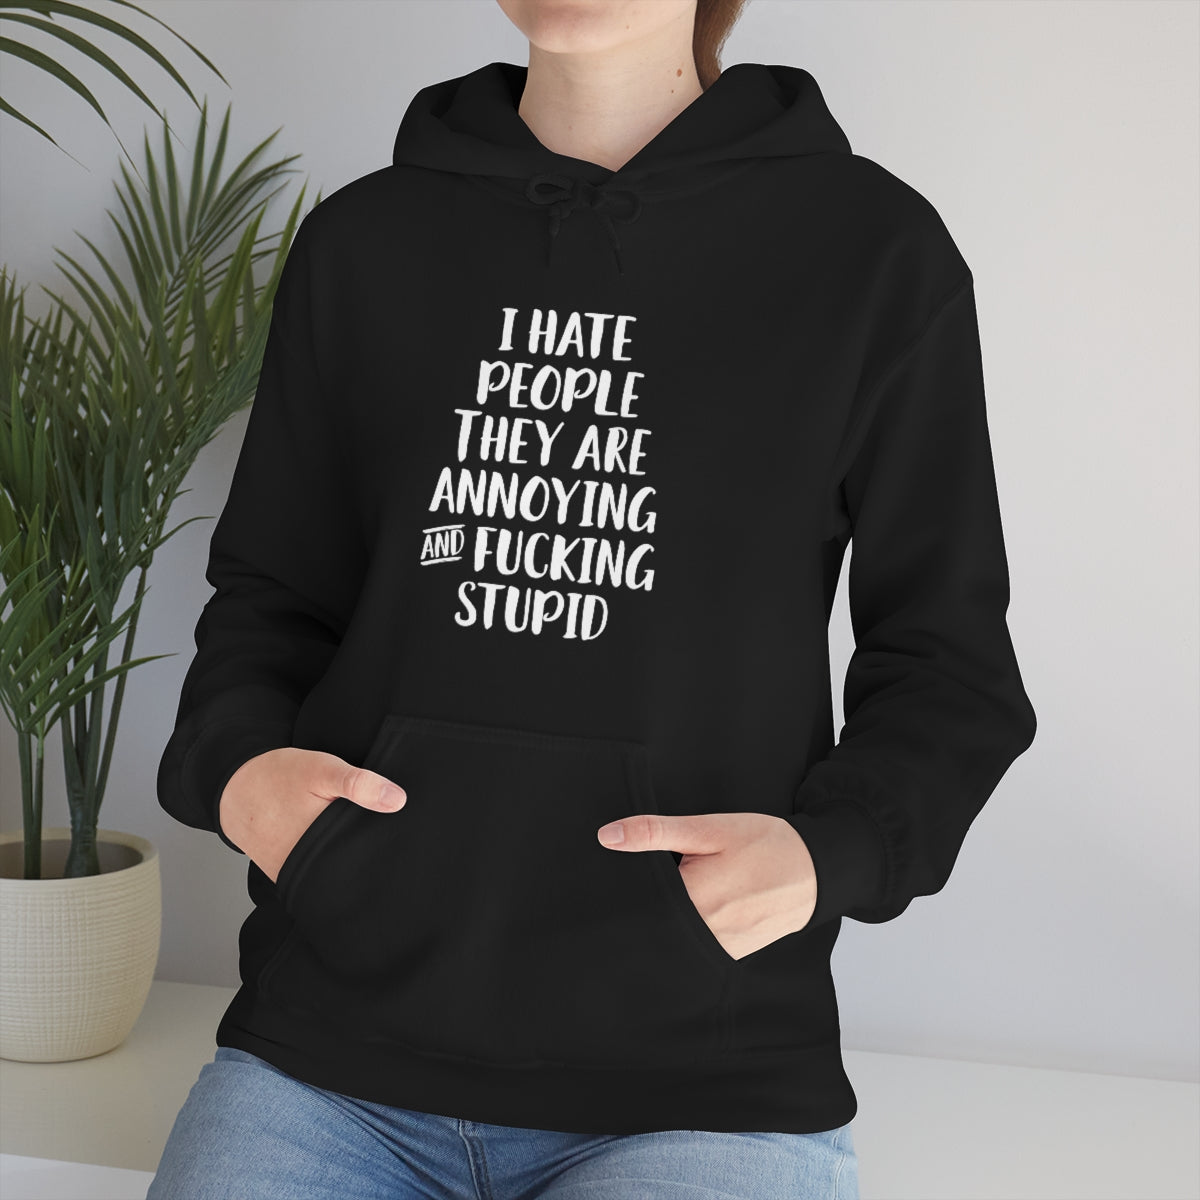 Hoody - I hate people they are annoying & fucking stupid